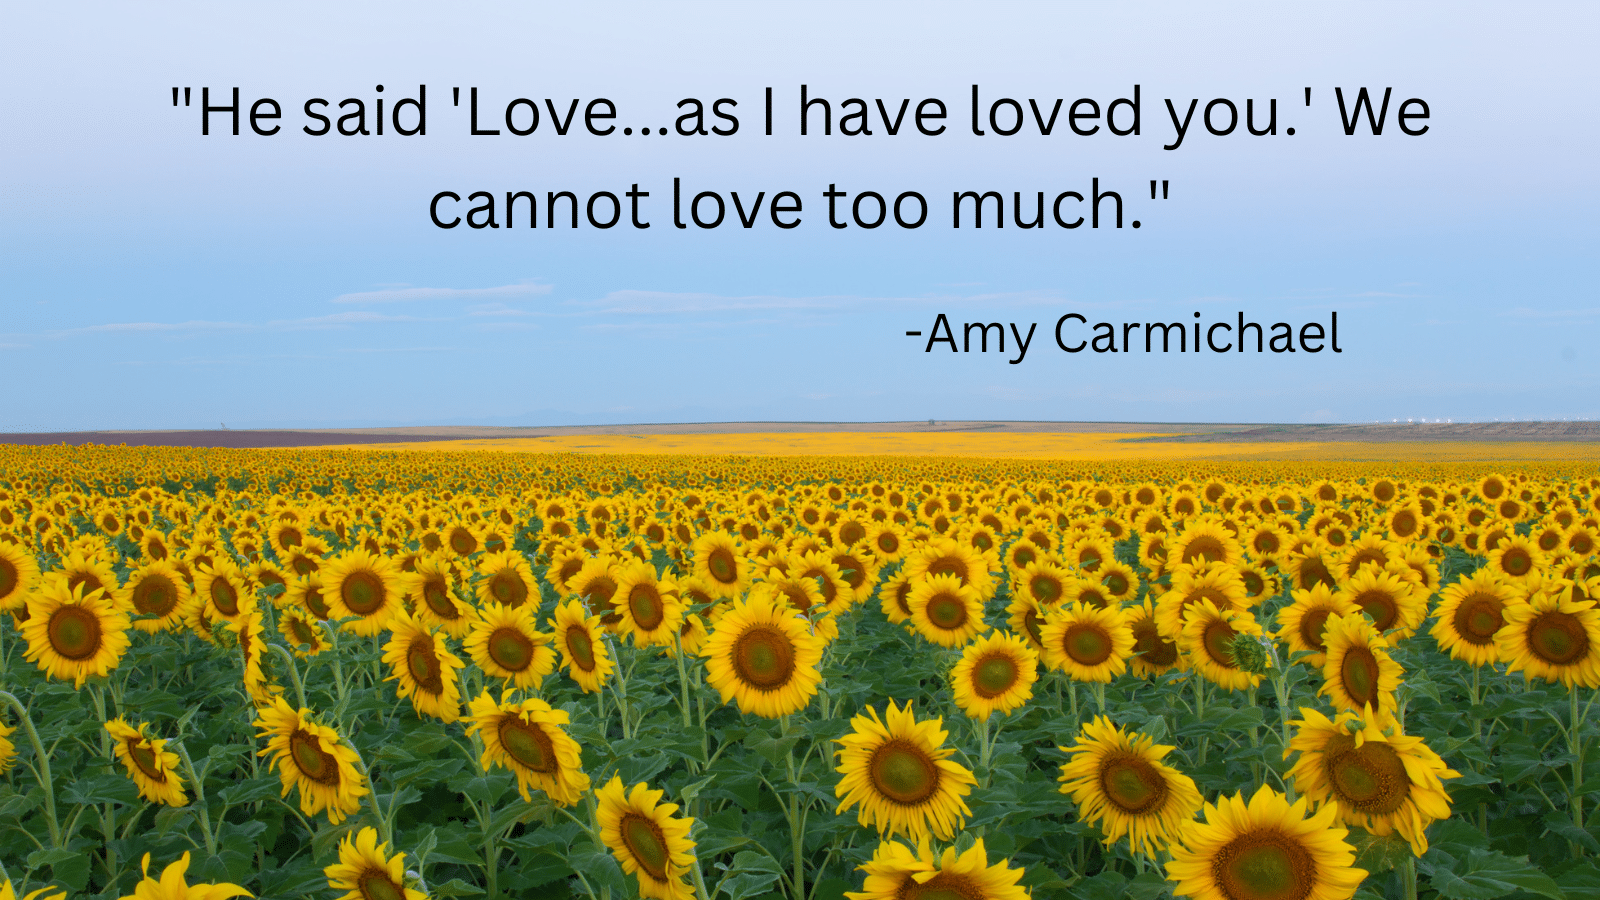 Field of sunflowers and Amy Carmichael quote